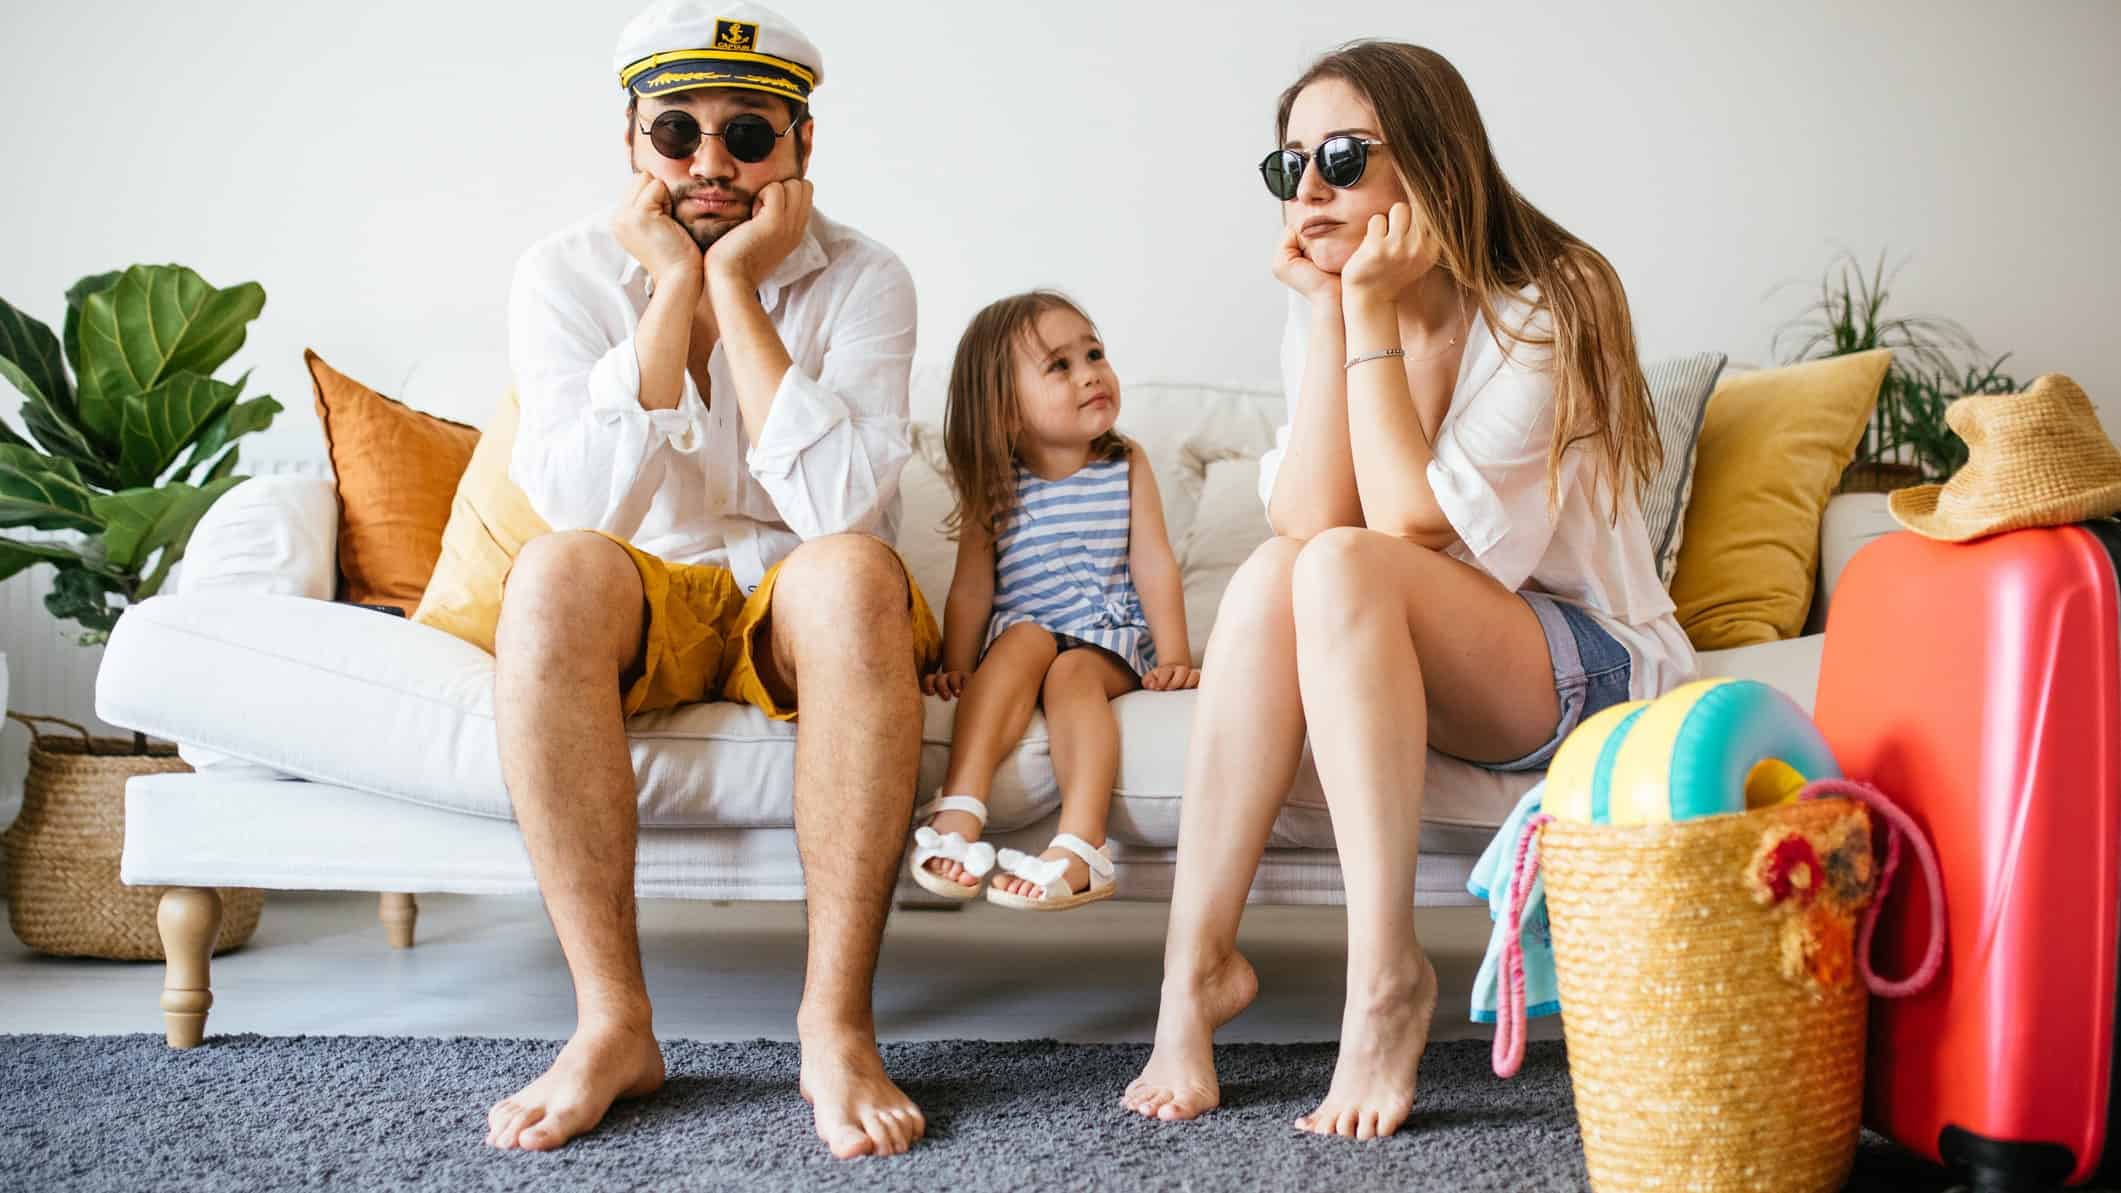 Sad family sit on the couch surrounded by bags, indicating travel restrictions hitting the share price of ASX travel companies